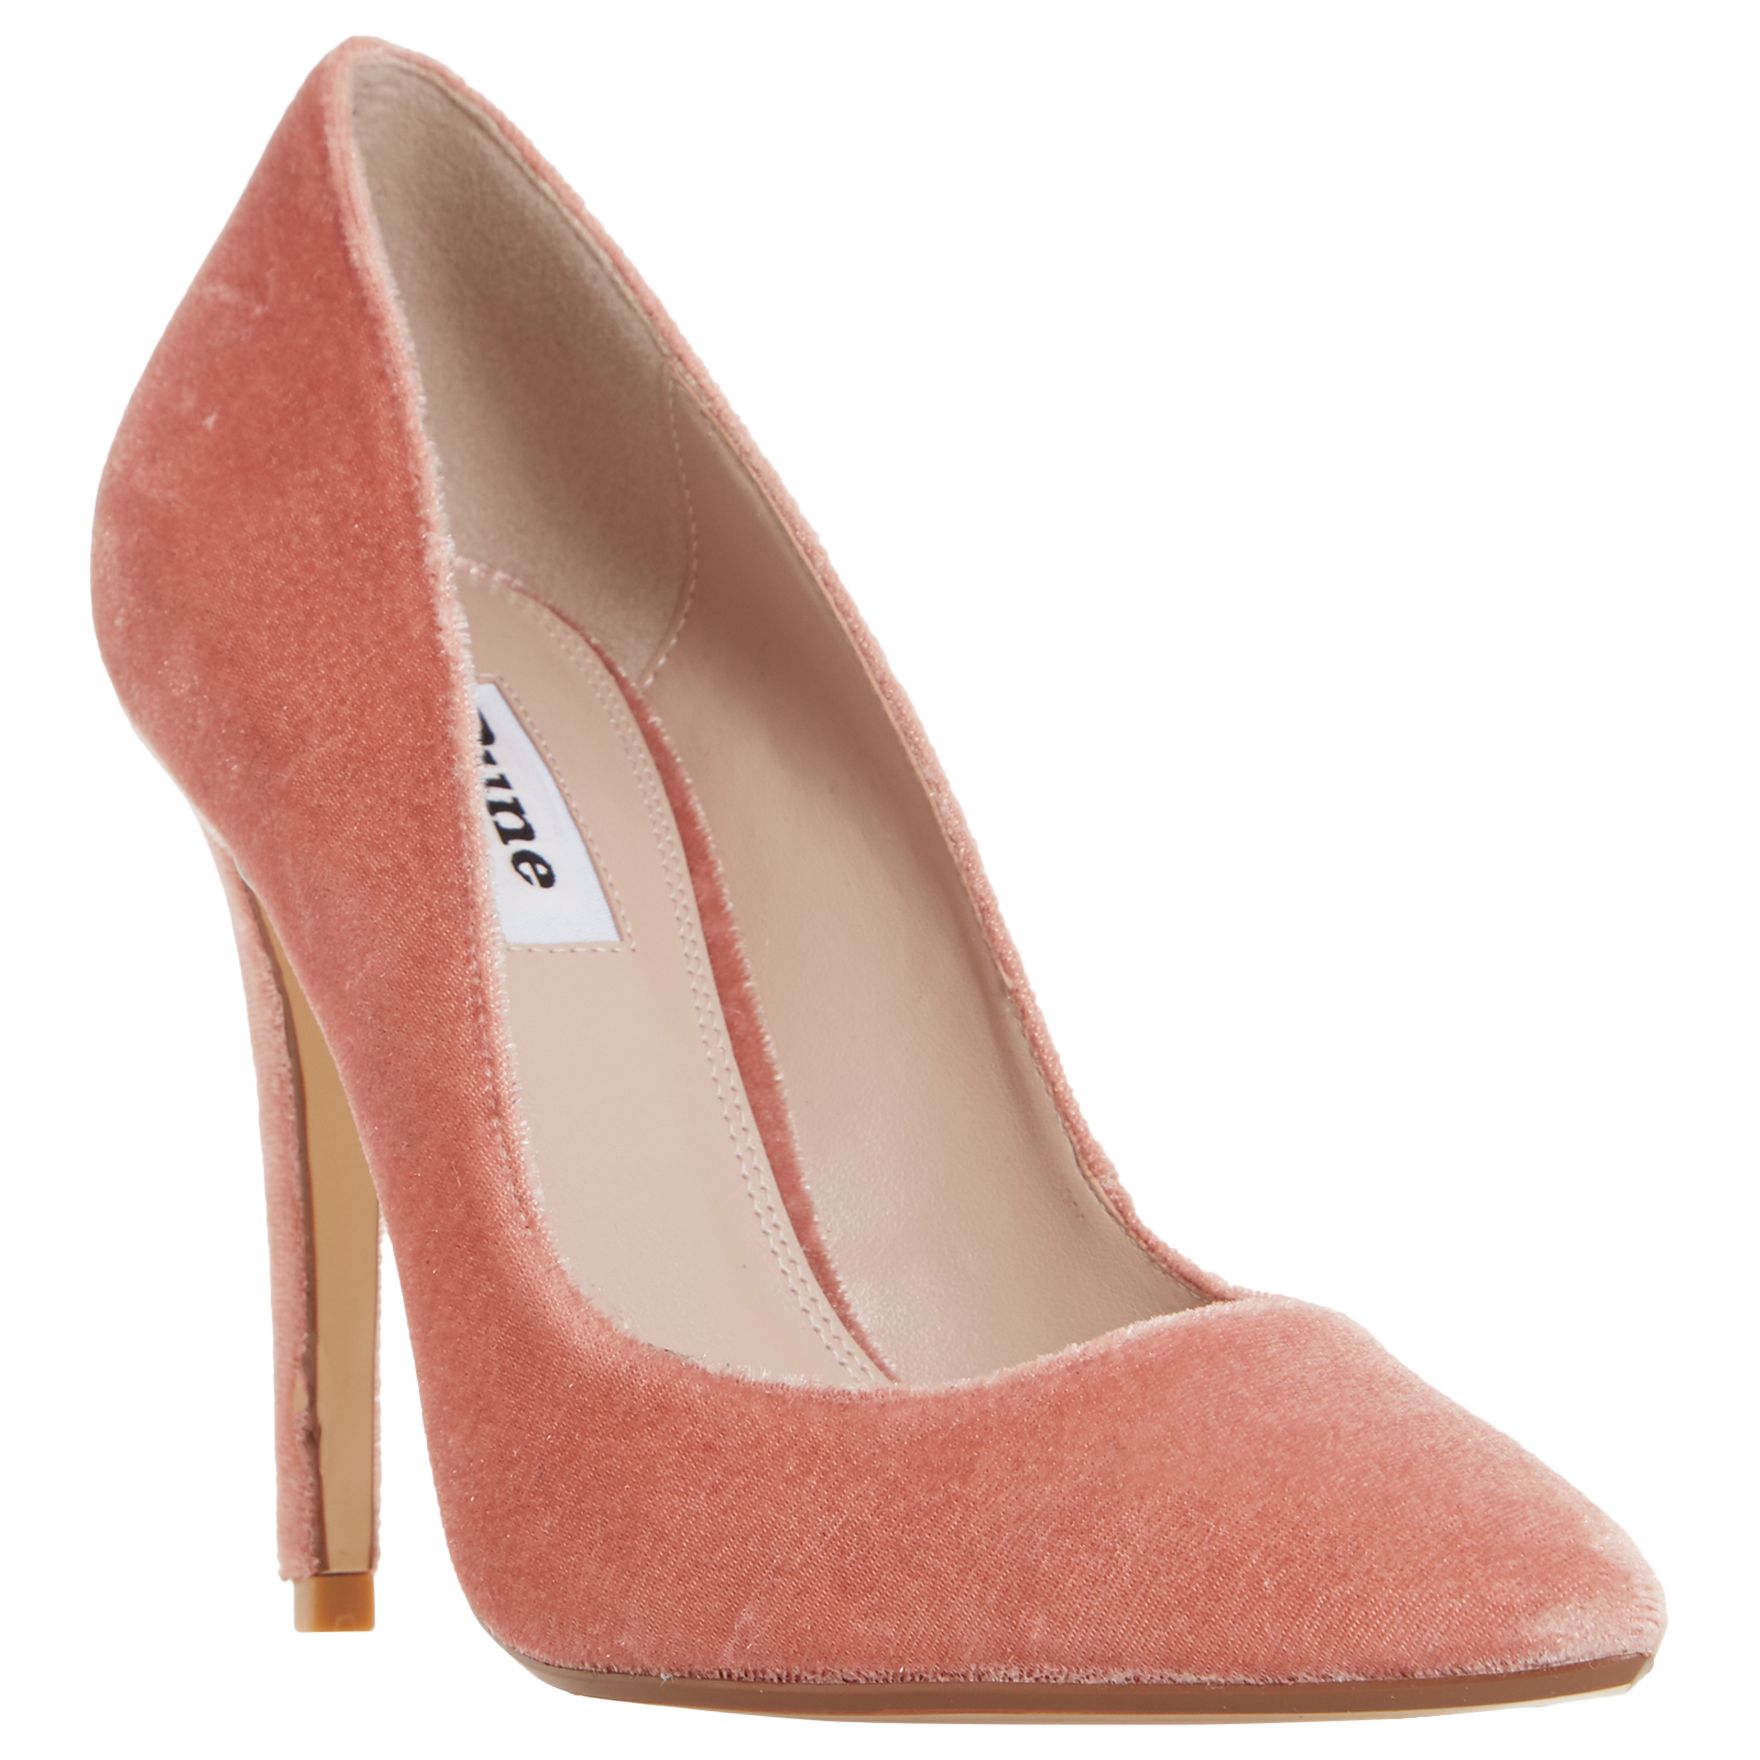 Dune Aiyana Pointed Toe Court Shoes, Blush, 5